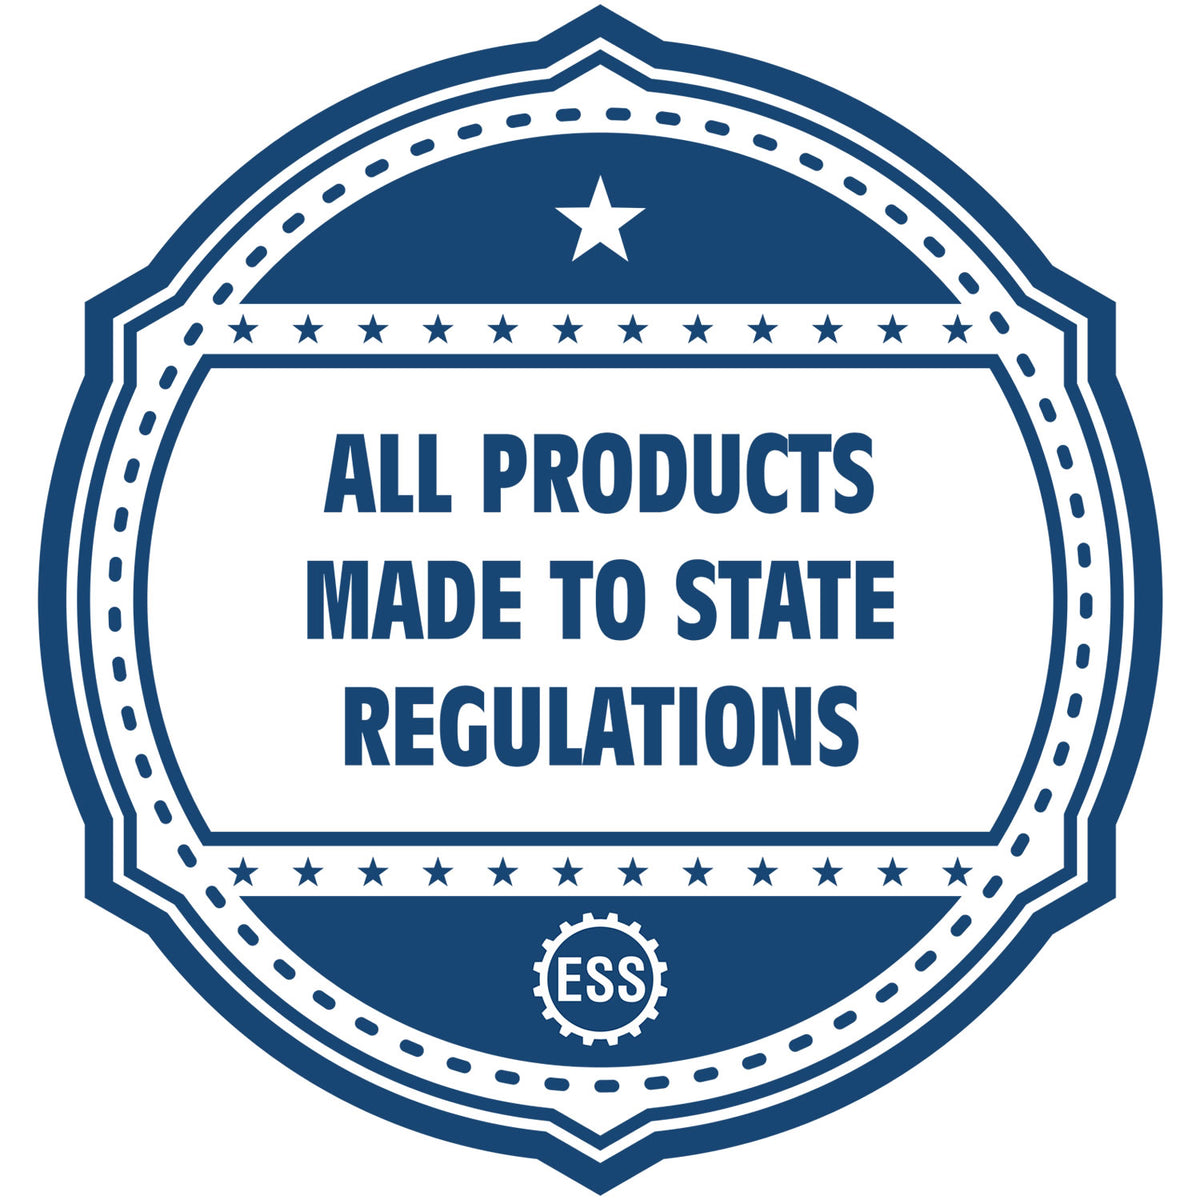 An icon or badge element for the Self-Inking Hawaii Landscape Architect Stamp showing that this product is made in compliance with state regulations.